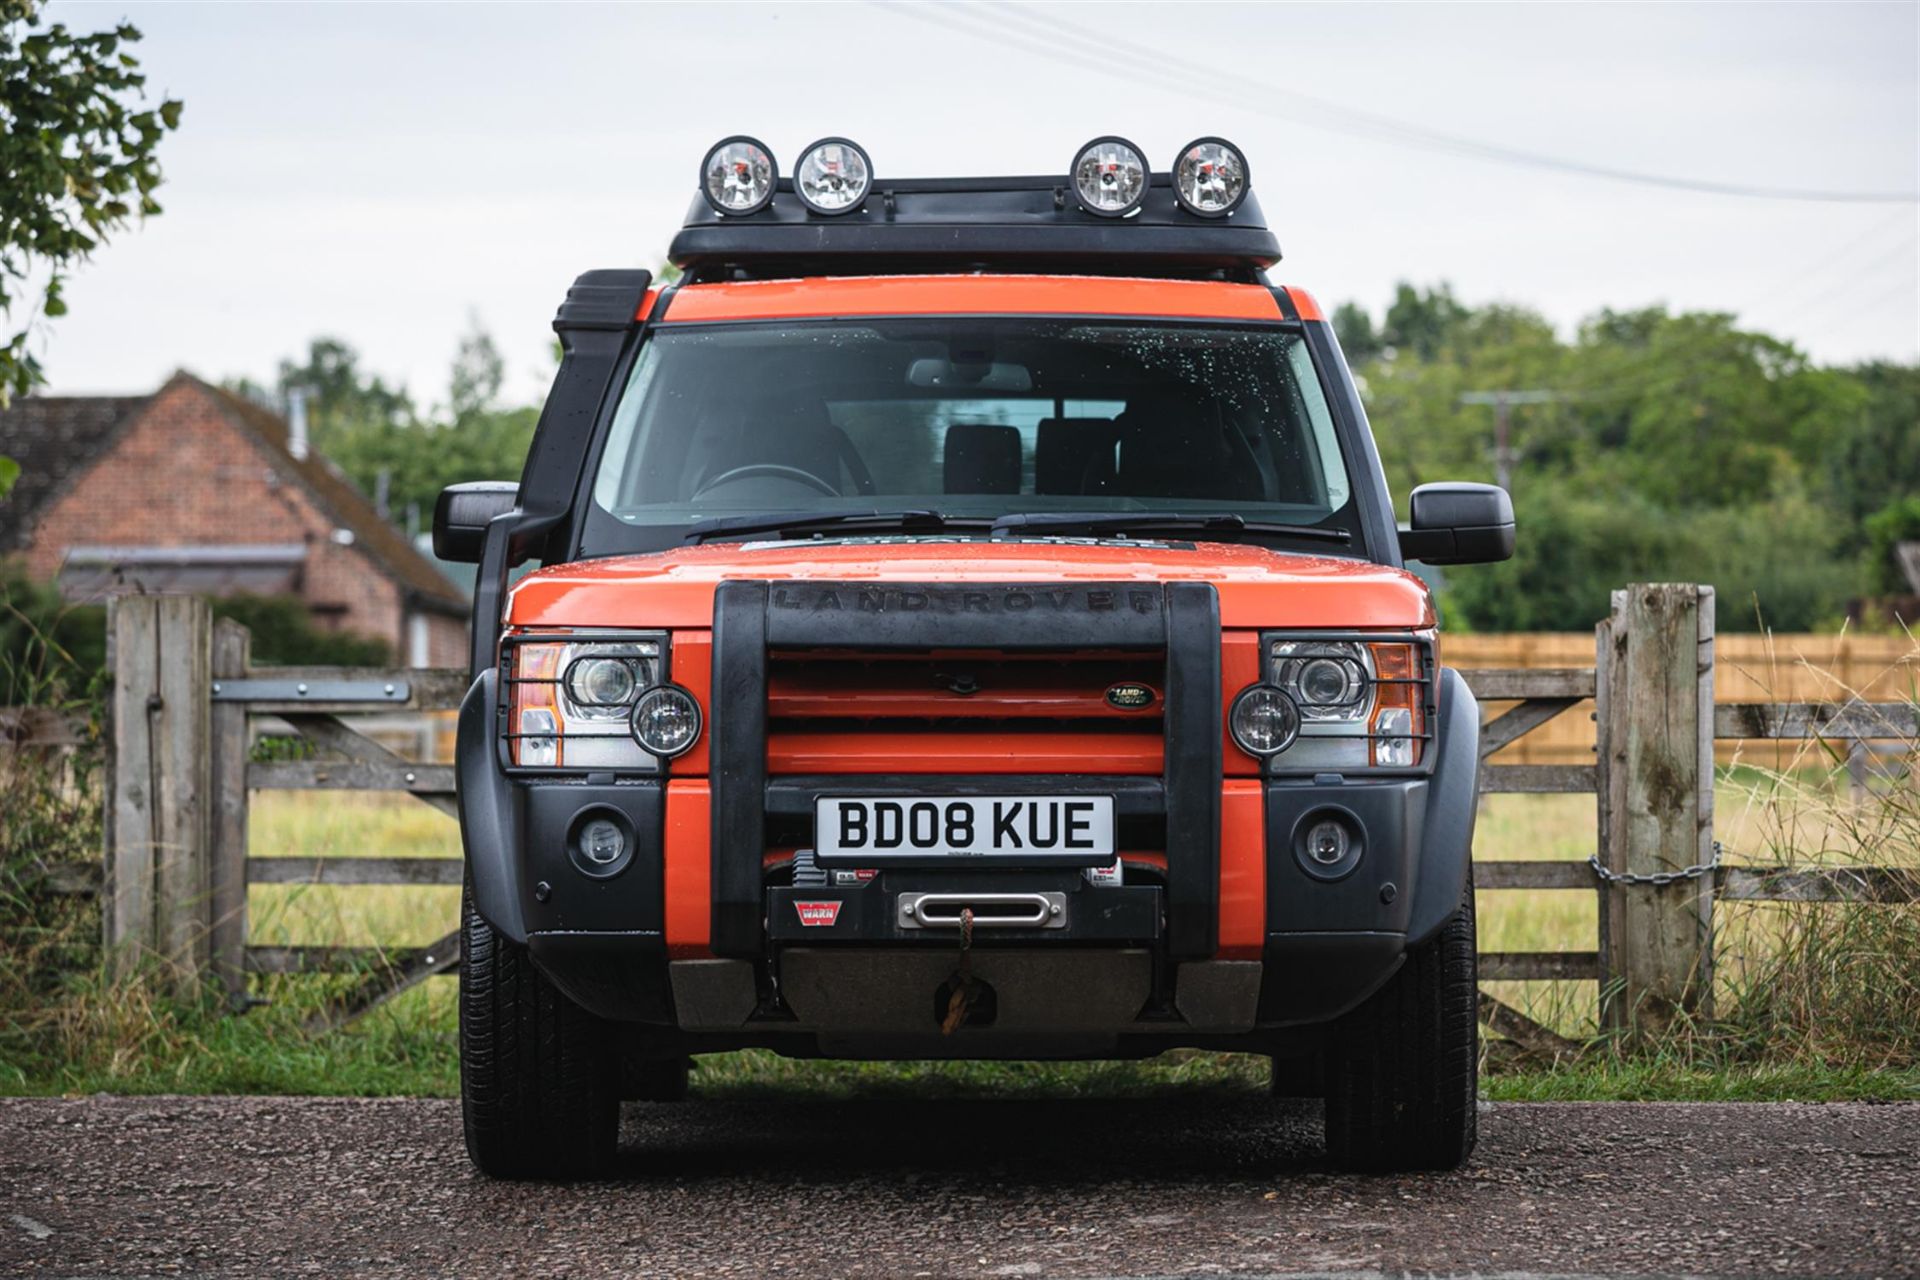 2008 Land Rover Discovery TDV6 HSE G4 Challenge - Image 4 of 10